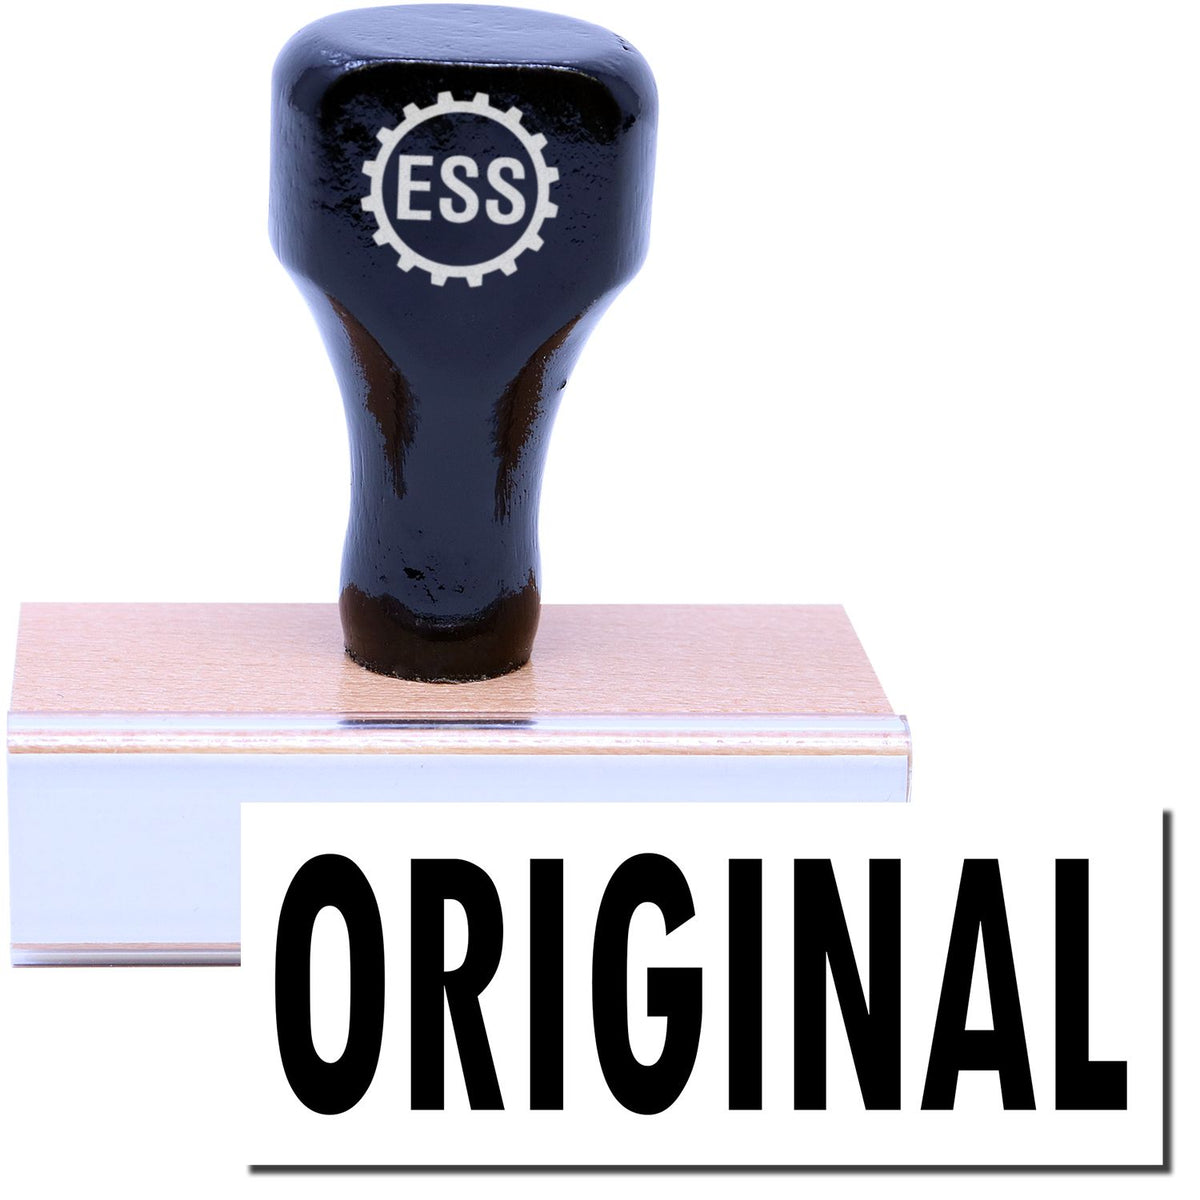 A stock office rubber stamp with a stamped image showing how the text &quot;ORIGINAL&quot; in a large font is displayed after stamping.